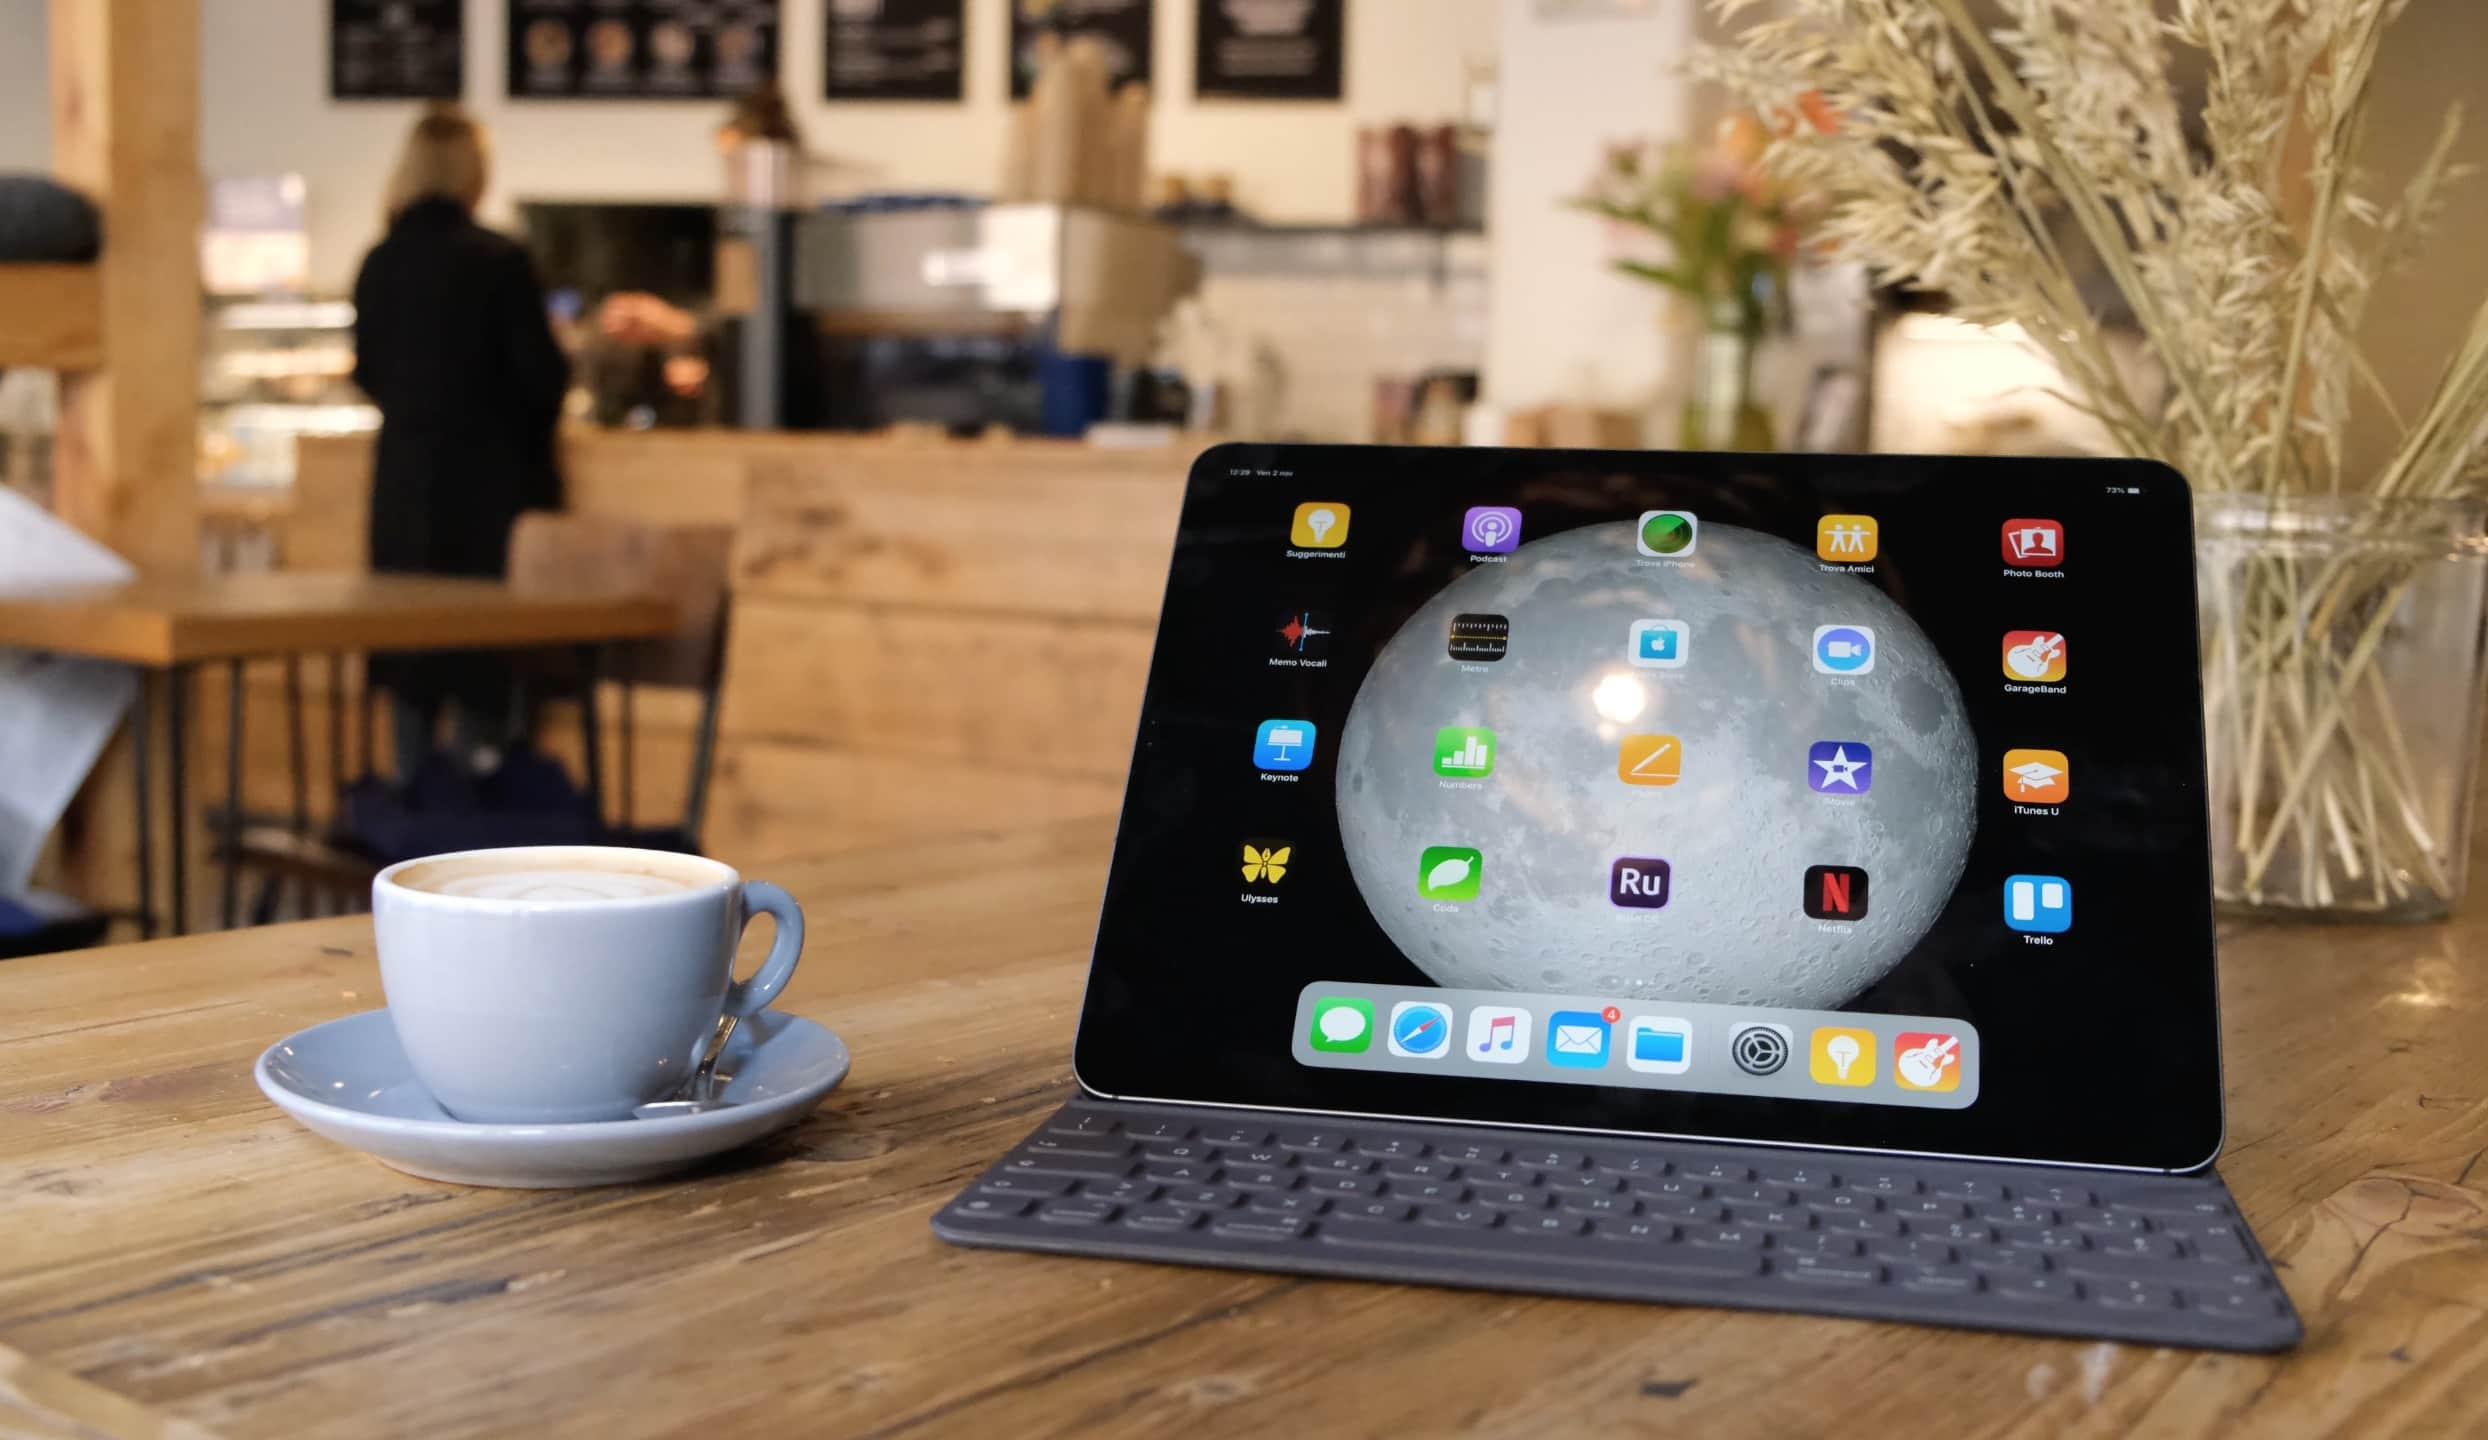 The Smart Keyboard Folio turns the iPad Pro into a laptop, but there are better options.